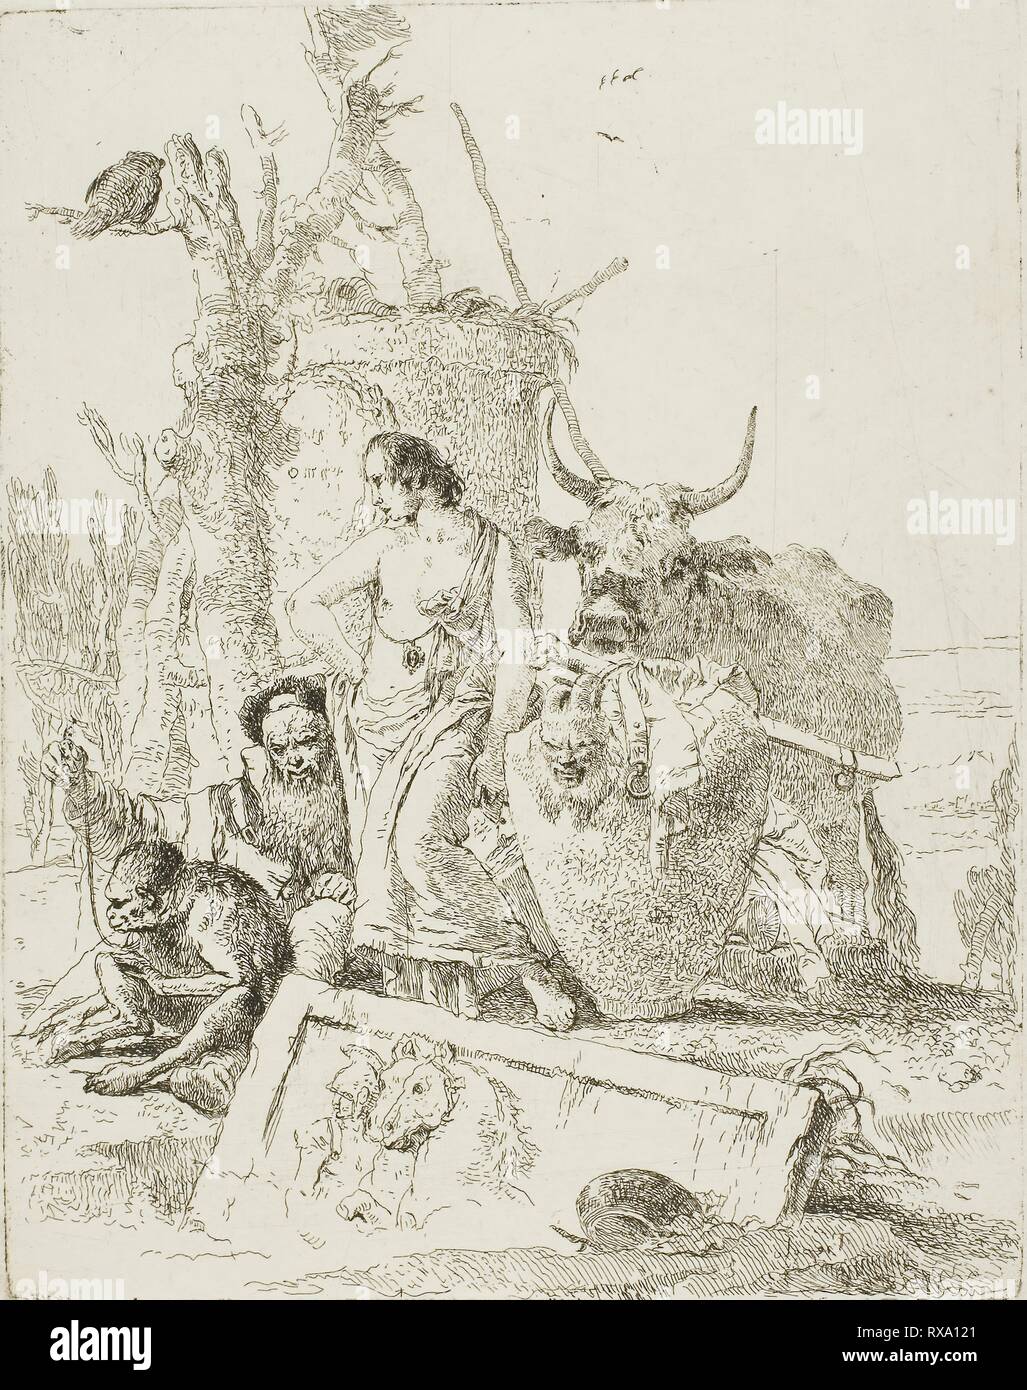 Young Shepherds and Old Man with a Monkey, from Scherzi. Giambattista Tiepolo; Italian, 1696-1770. Date: 1735-1740. Dimensions: 225 x 176 mm (plate); 392 x 268 mm (sheet). Etching printed in black on paper. Origin: Italy. Museum: The Chicago Art Institute. Stock Photo